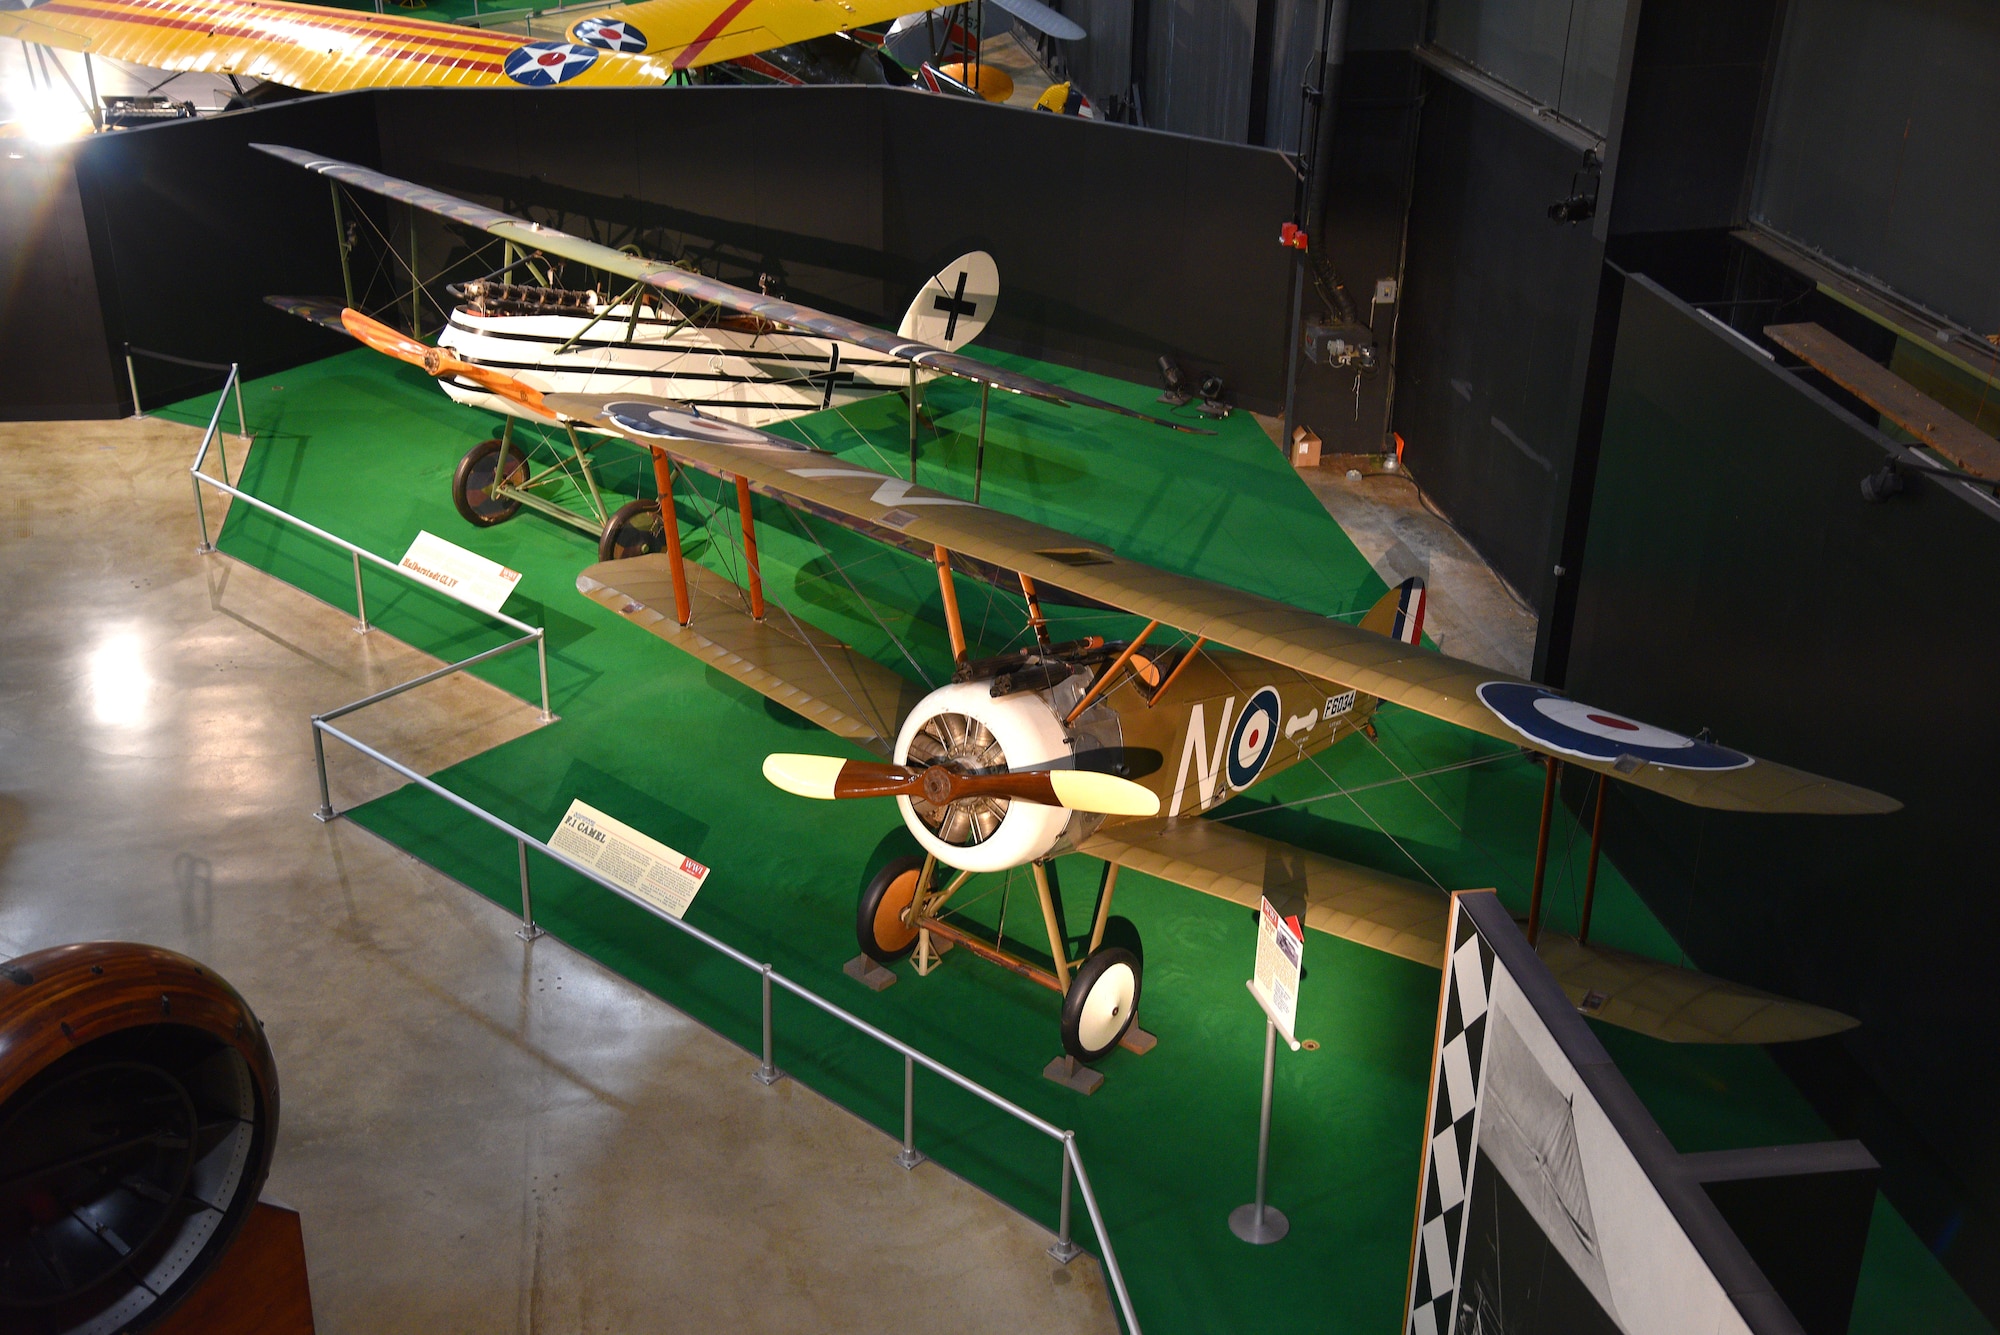 Two early years aircraft on display. These are fixed wing biplanes that are driven by propellers.